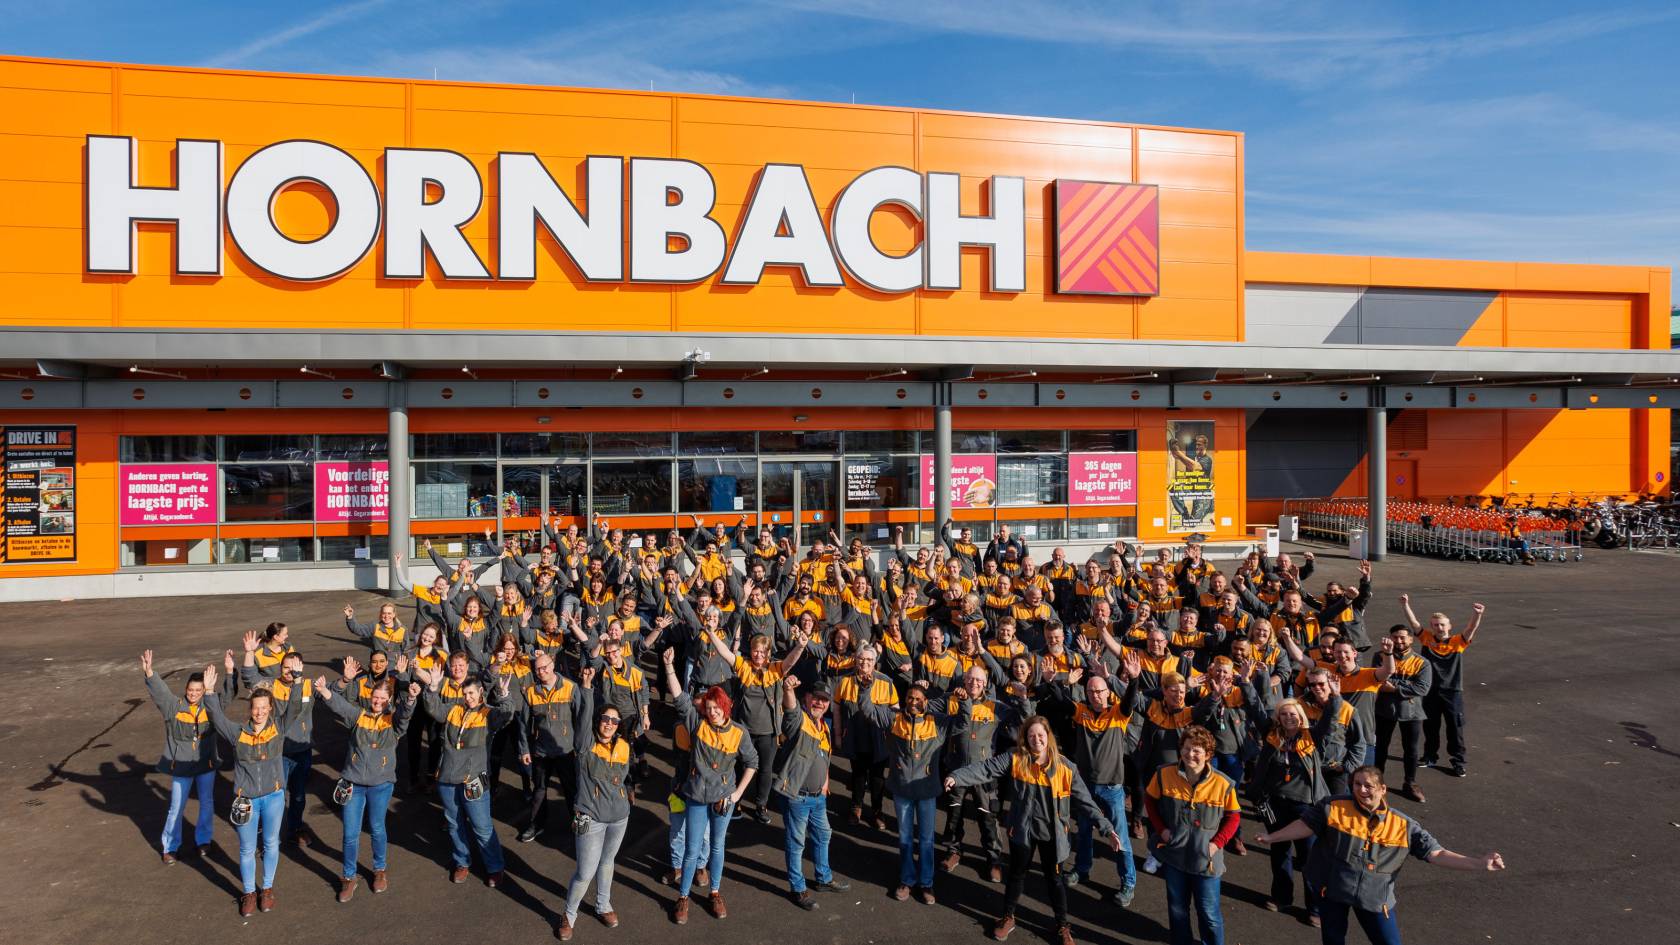 Hornbach: How do you balance the interests of the company and the employees